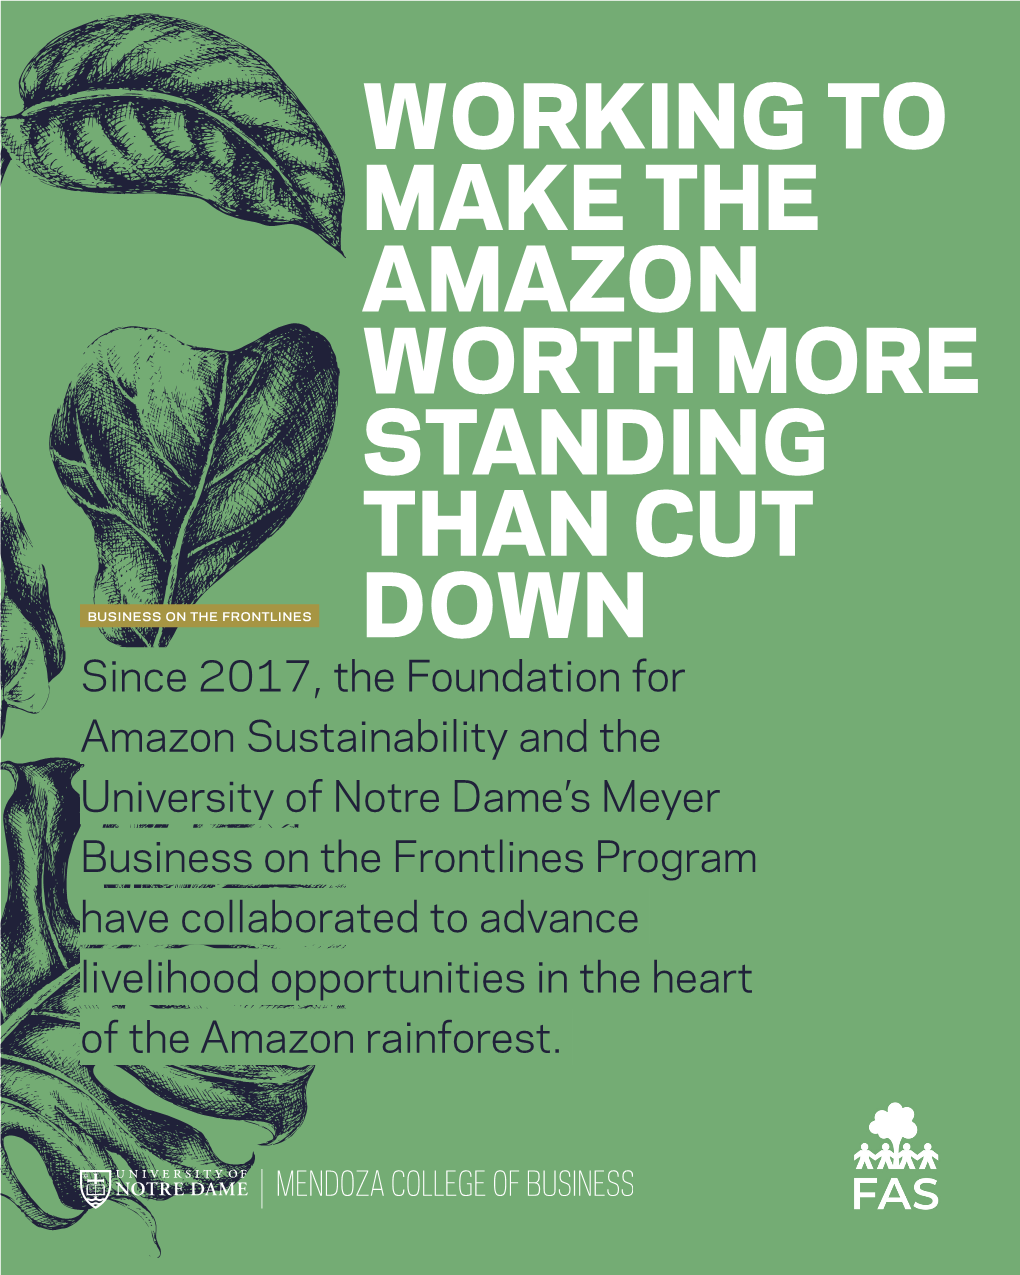 Working to Make the Amazon Worth More Standing Than